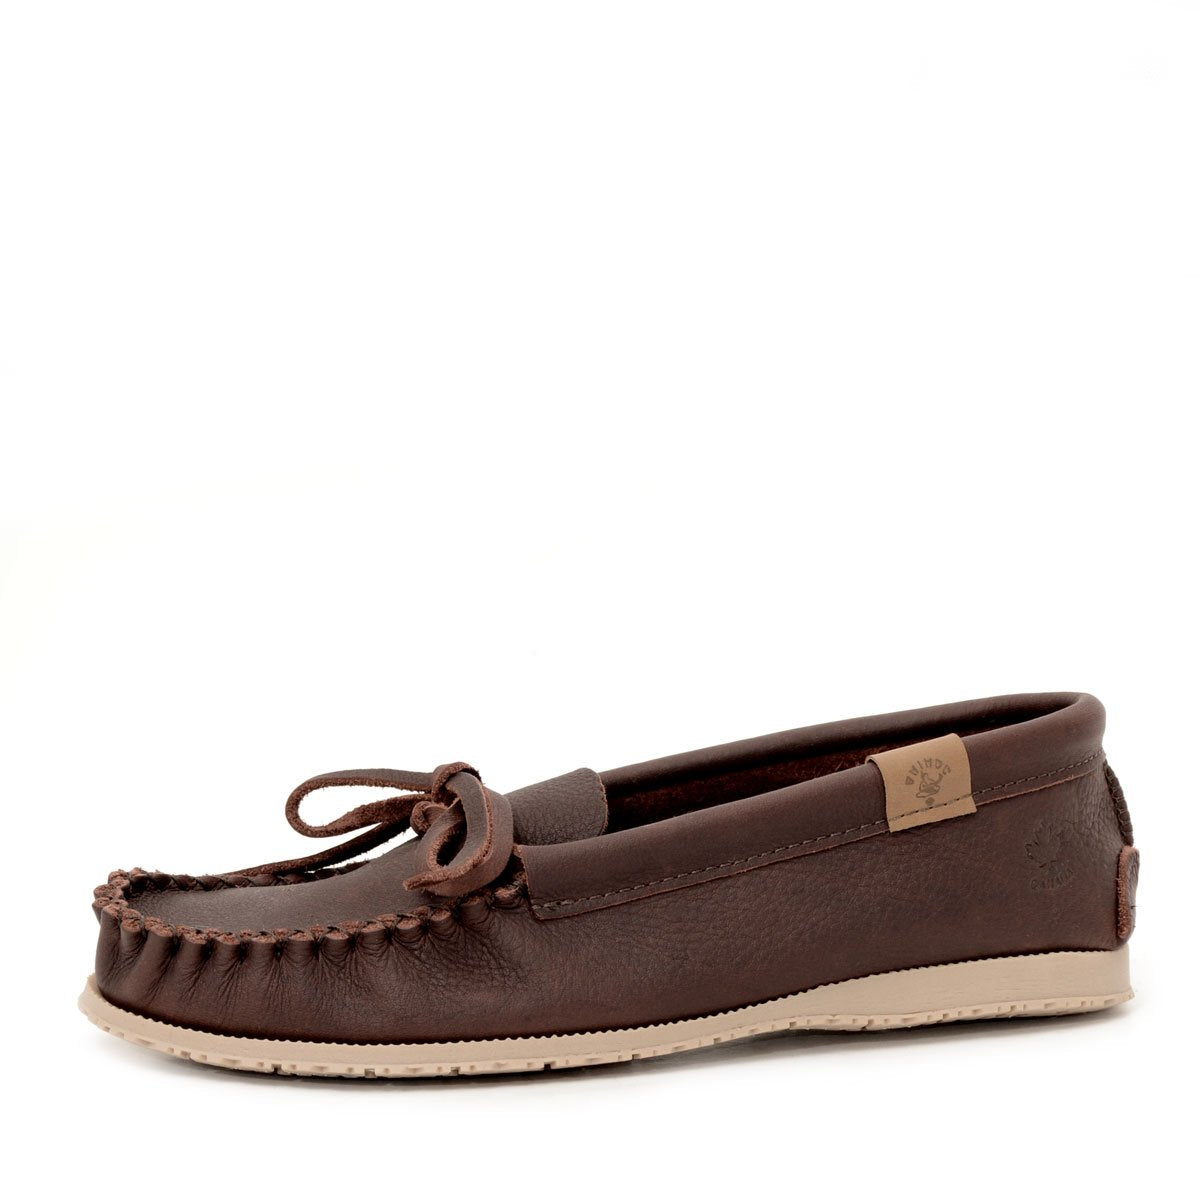 Nosh Grizzly Moccasin for Men - Brown 